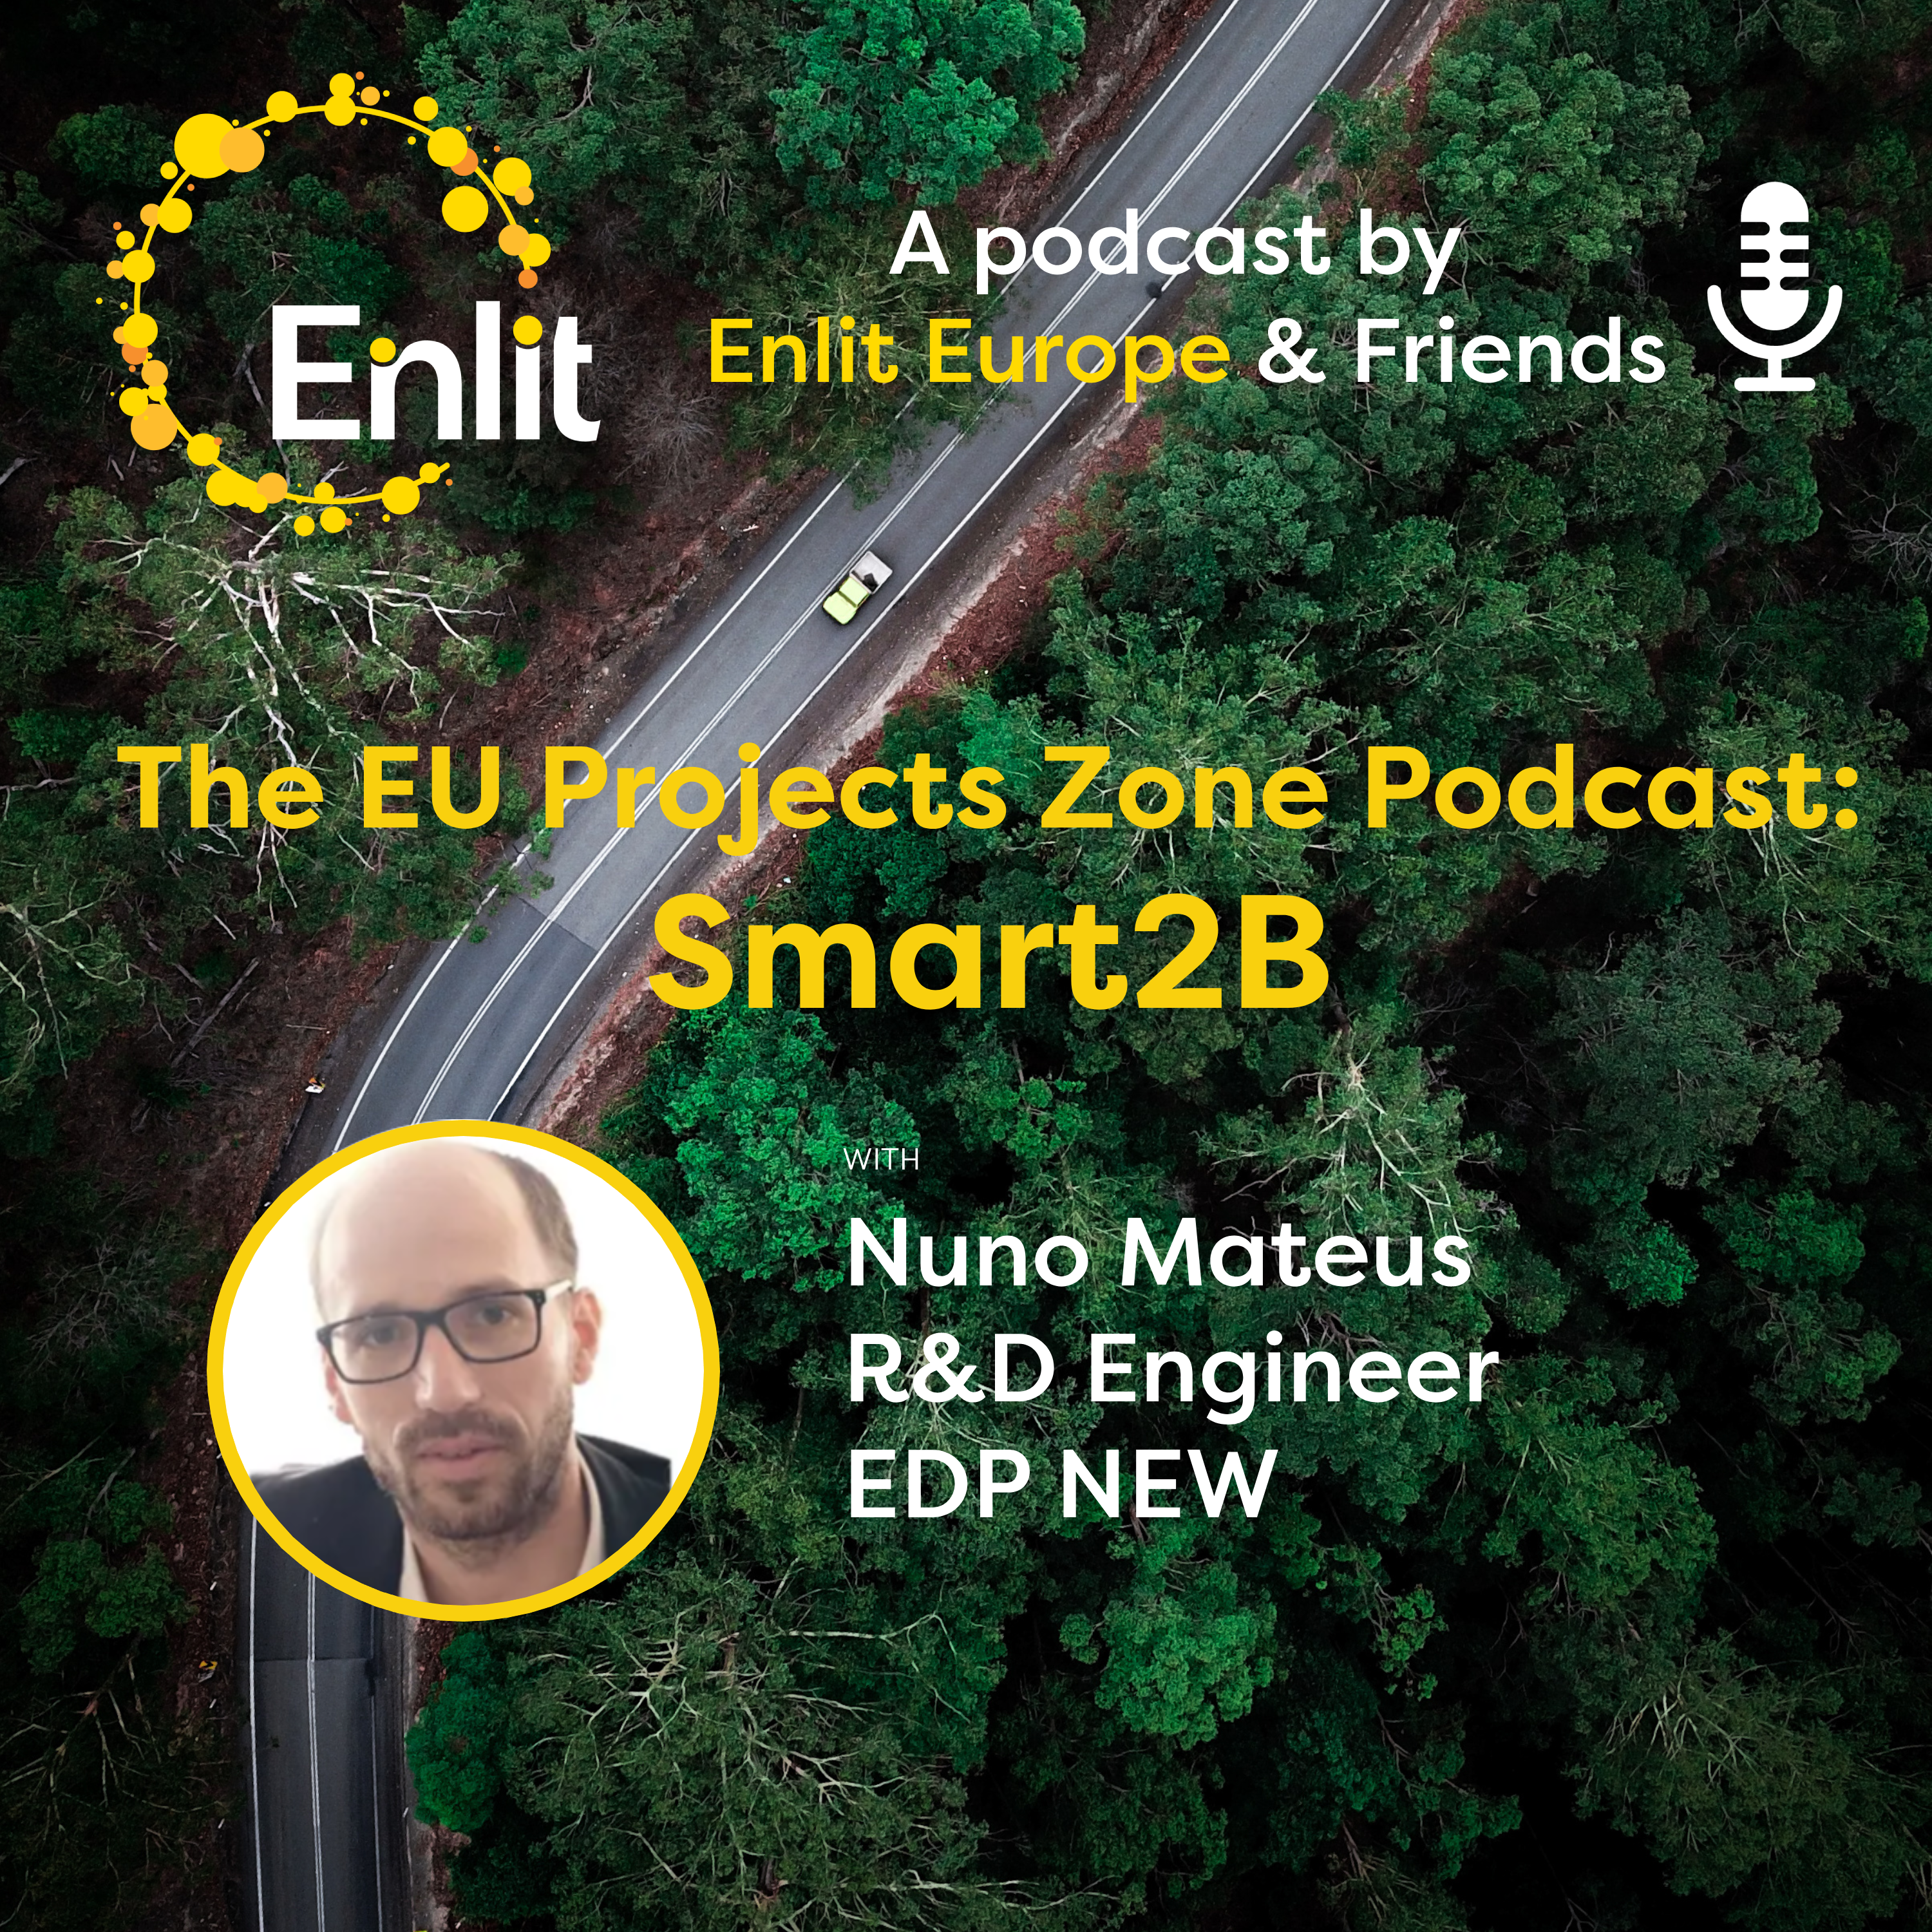 The EU Projects Zone Podcast: Smart2B with Nuno Mateus